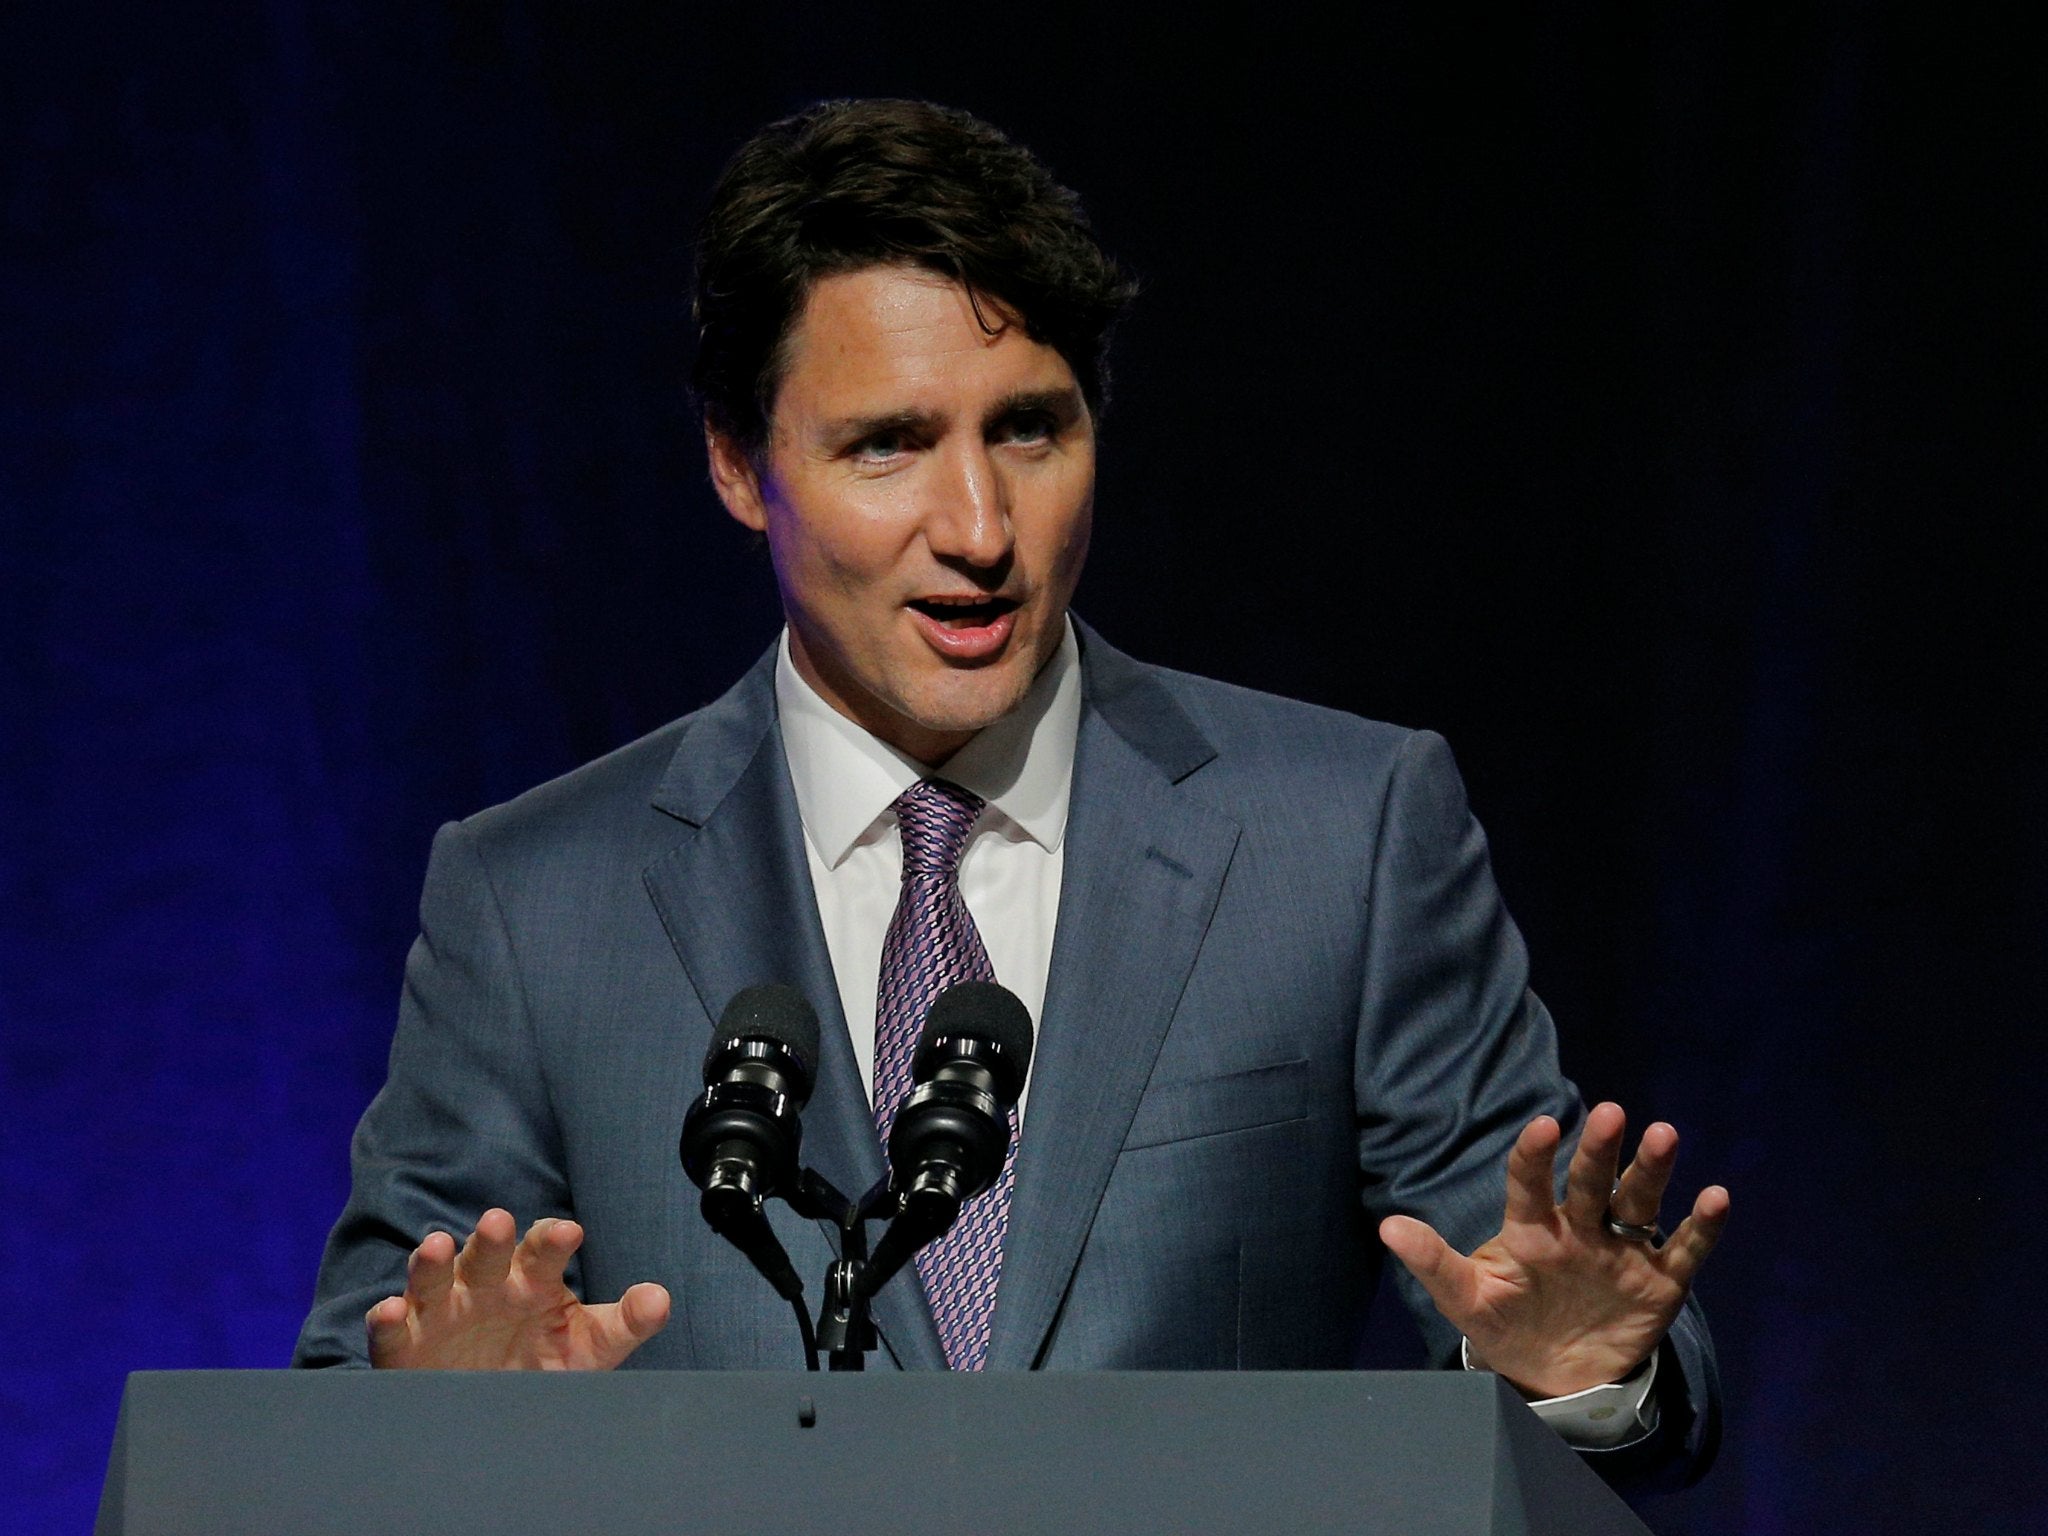 Canadian Prime Minister Justin Trudeau addresses the National Governors Association summer meeting